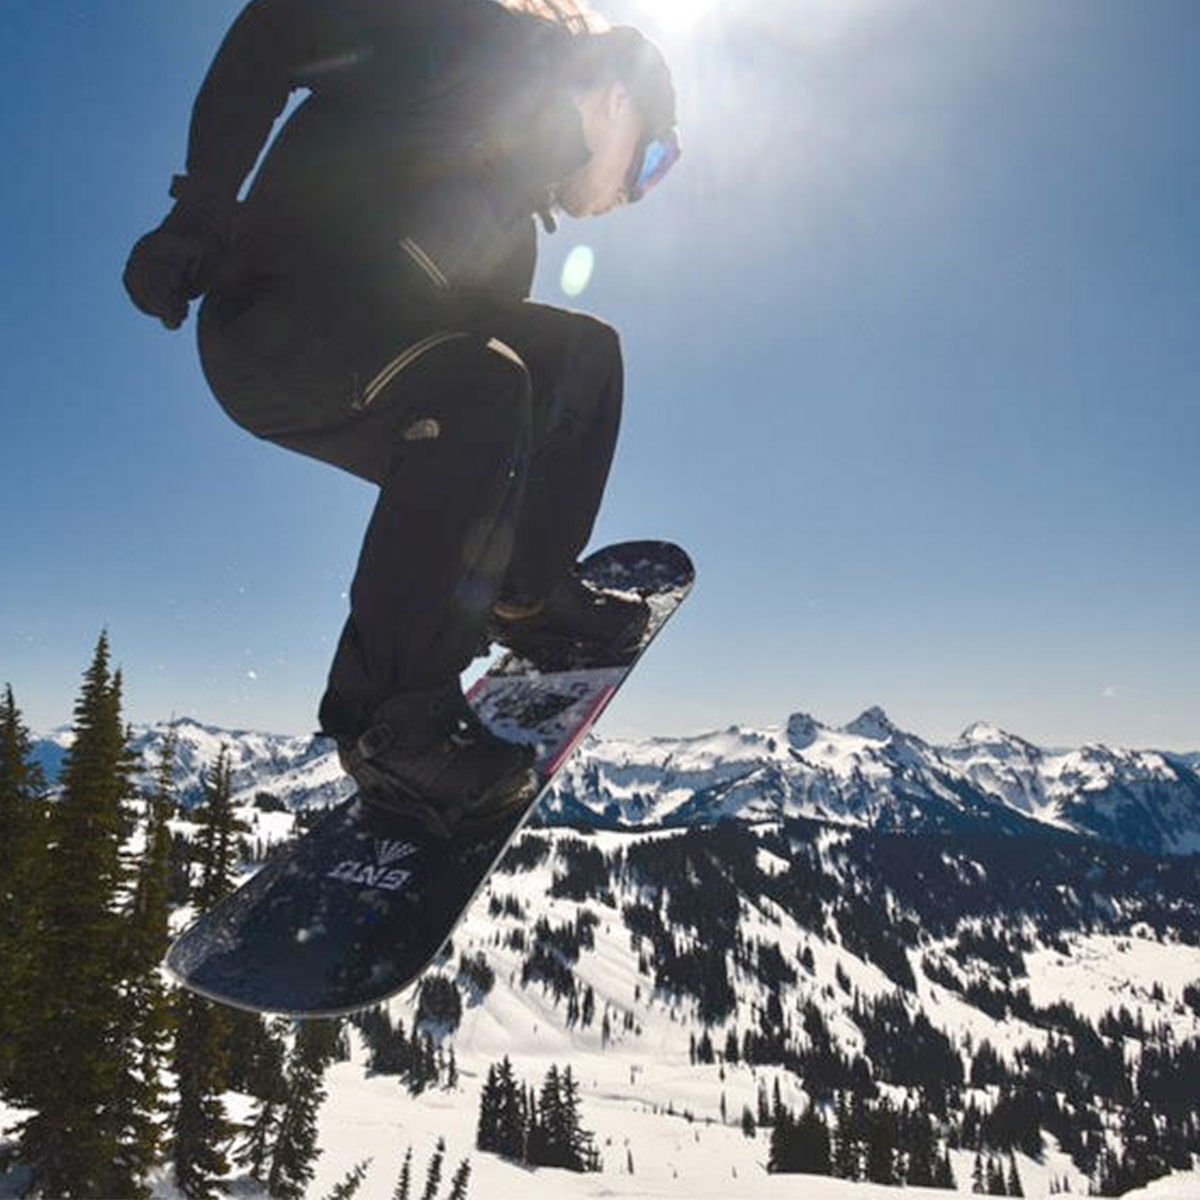 snowboarder catching air